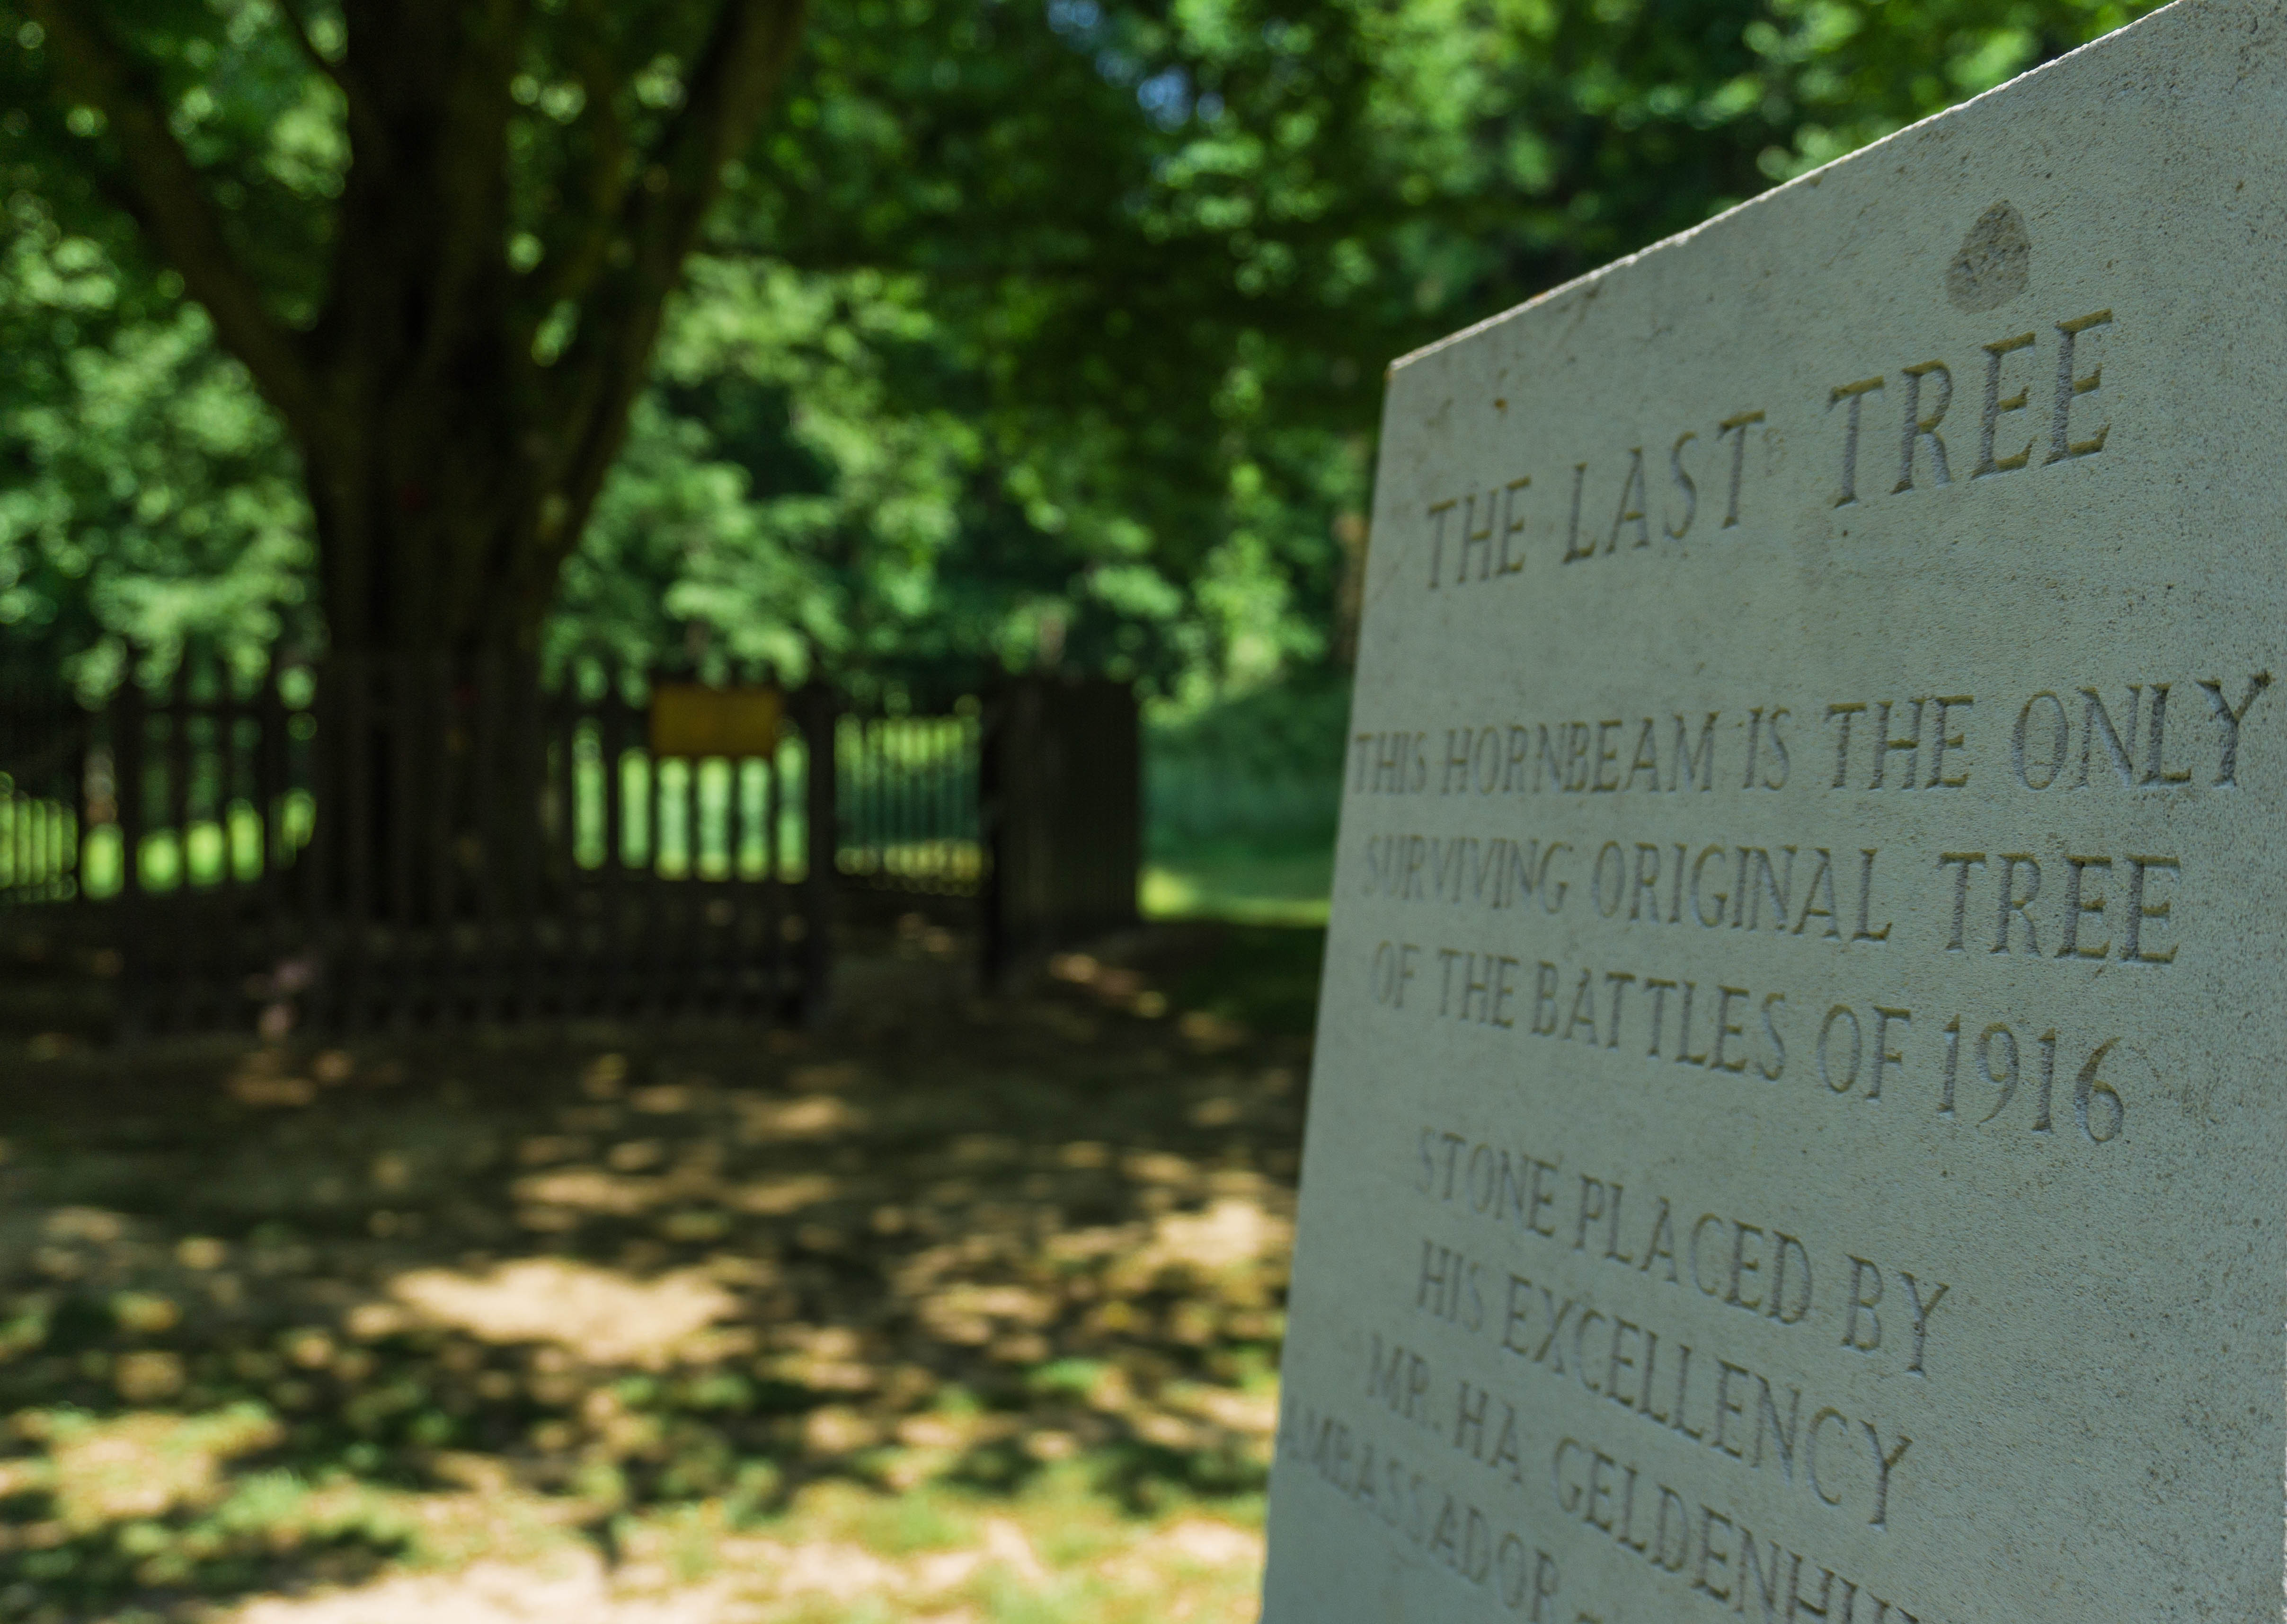 The Last Tree in Delville Wood found on a remembrance trail